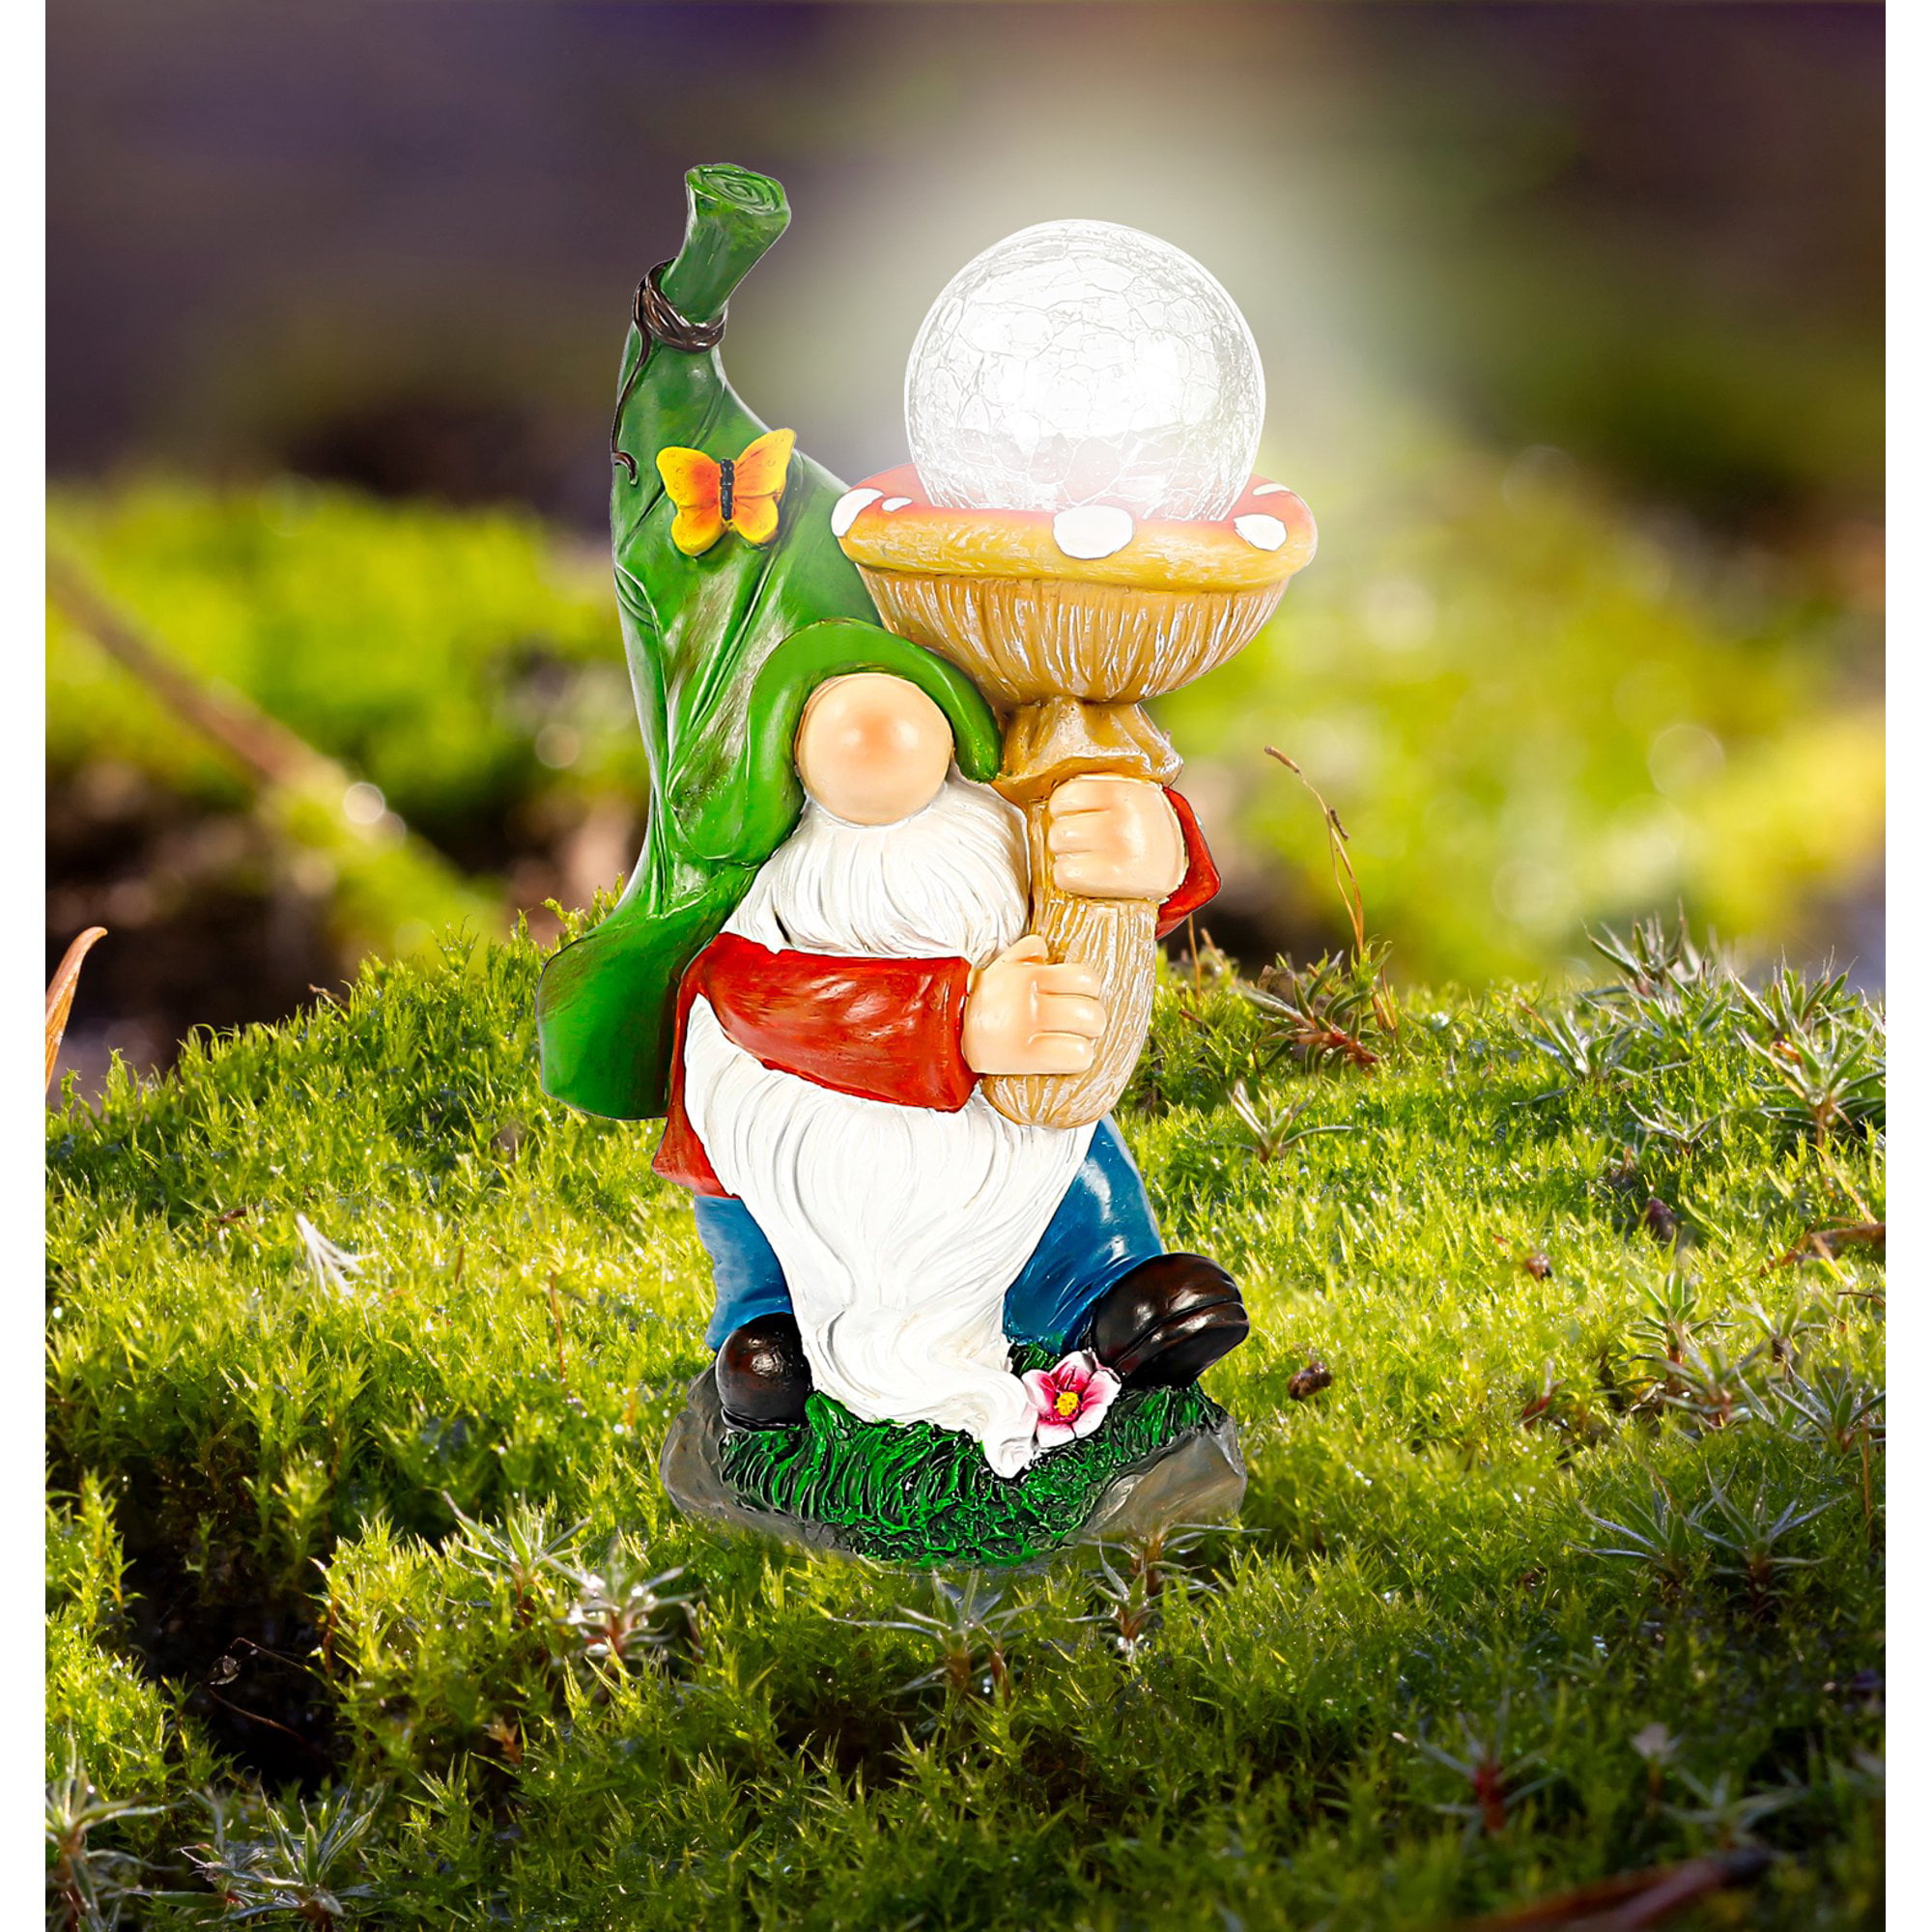 Gnome Statue Decor Solar Powered Garden  for Outdoor Patio Yard Decorations 